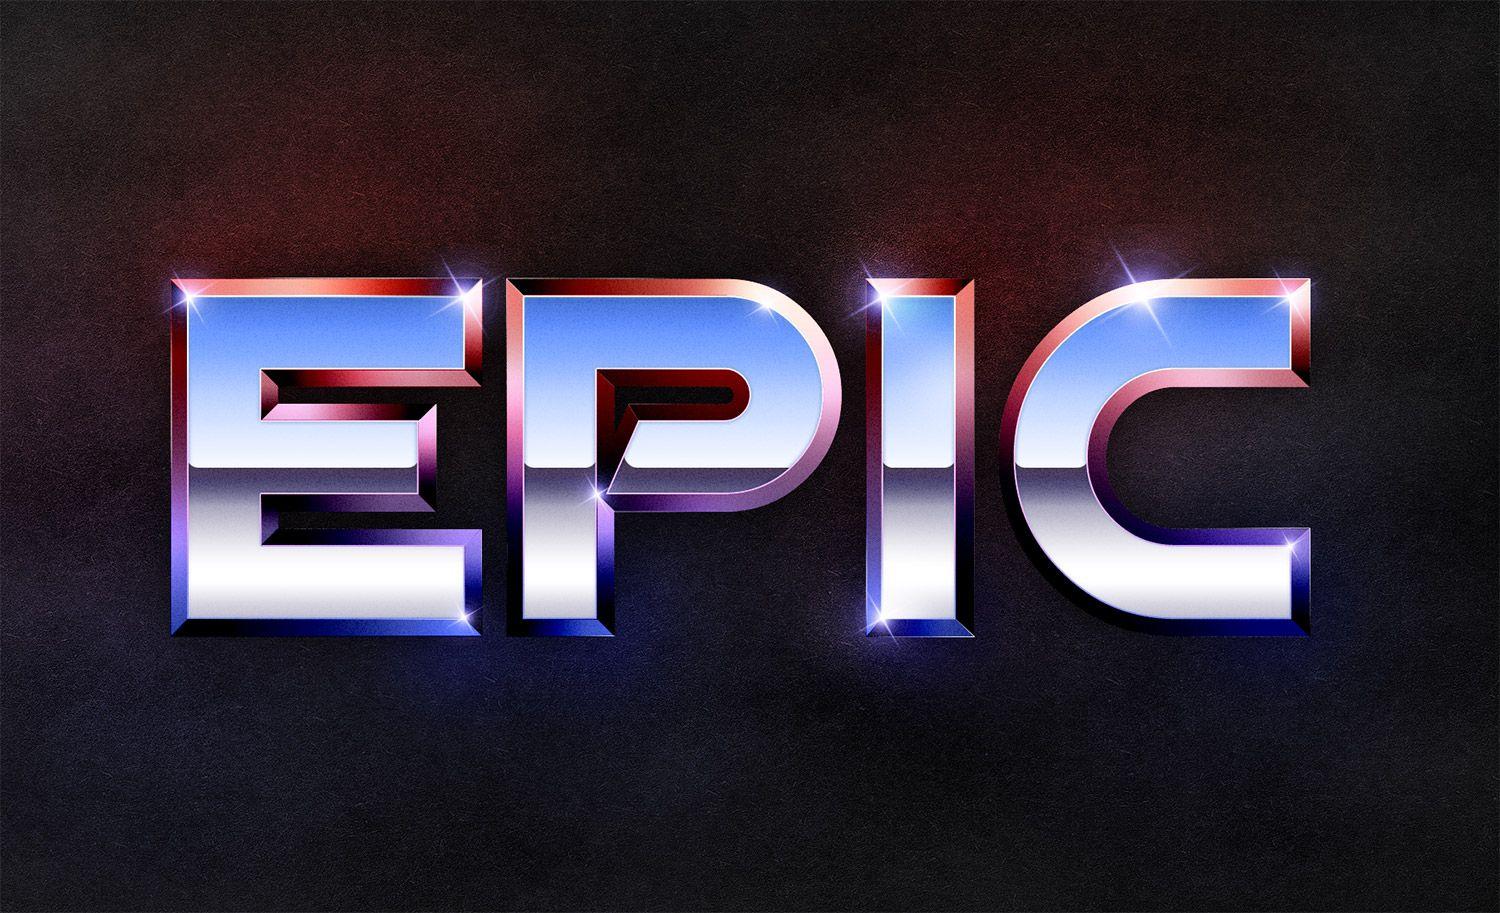 Blue Metal Logo - Recreate the Epic 80's Metal Text Effect in Photoshop